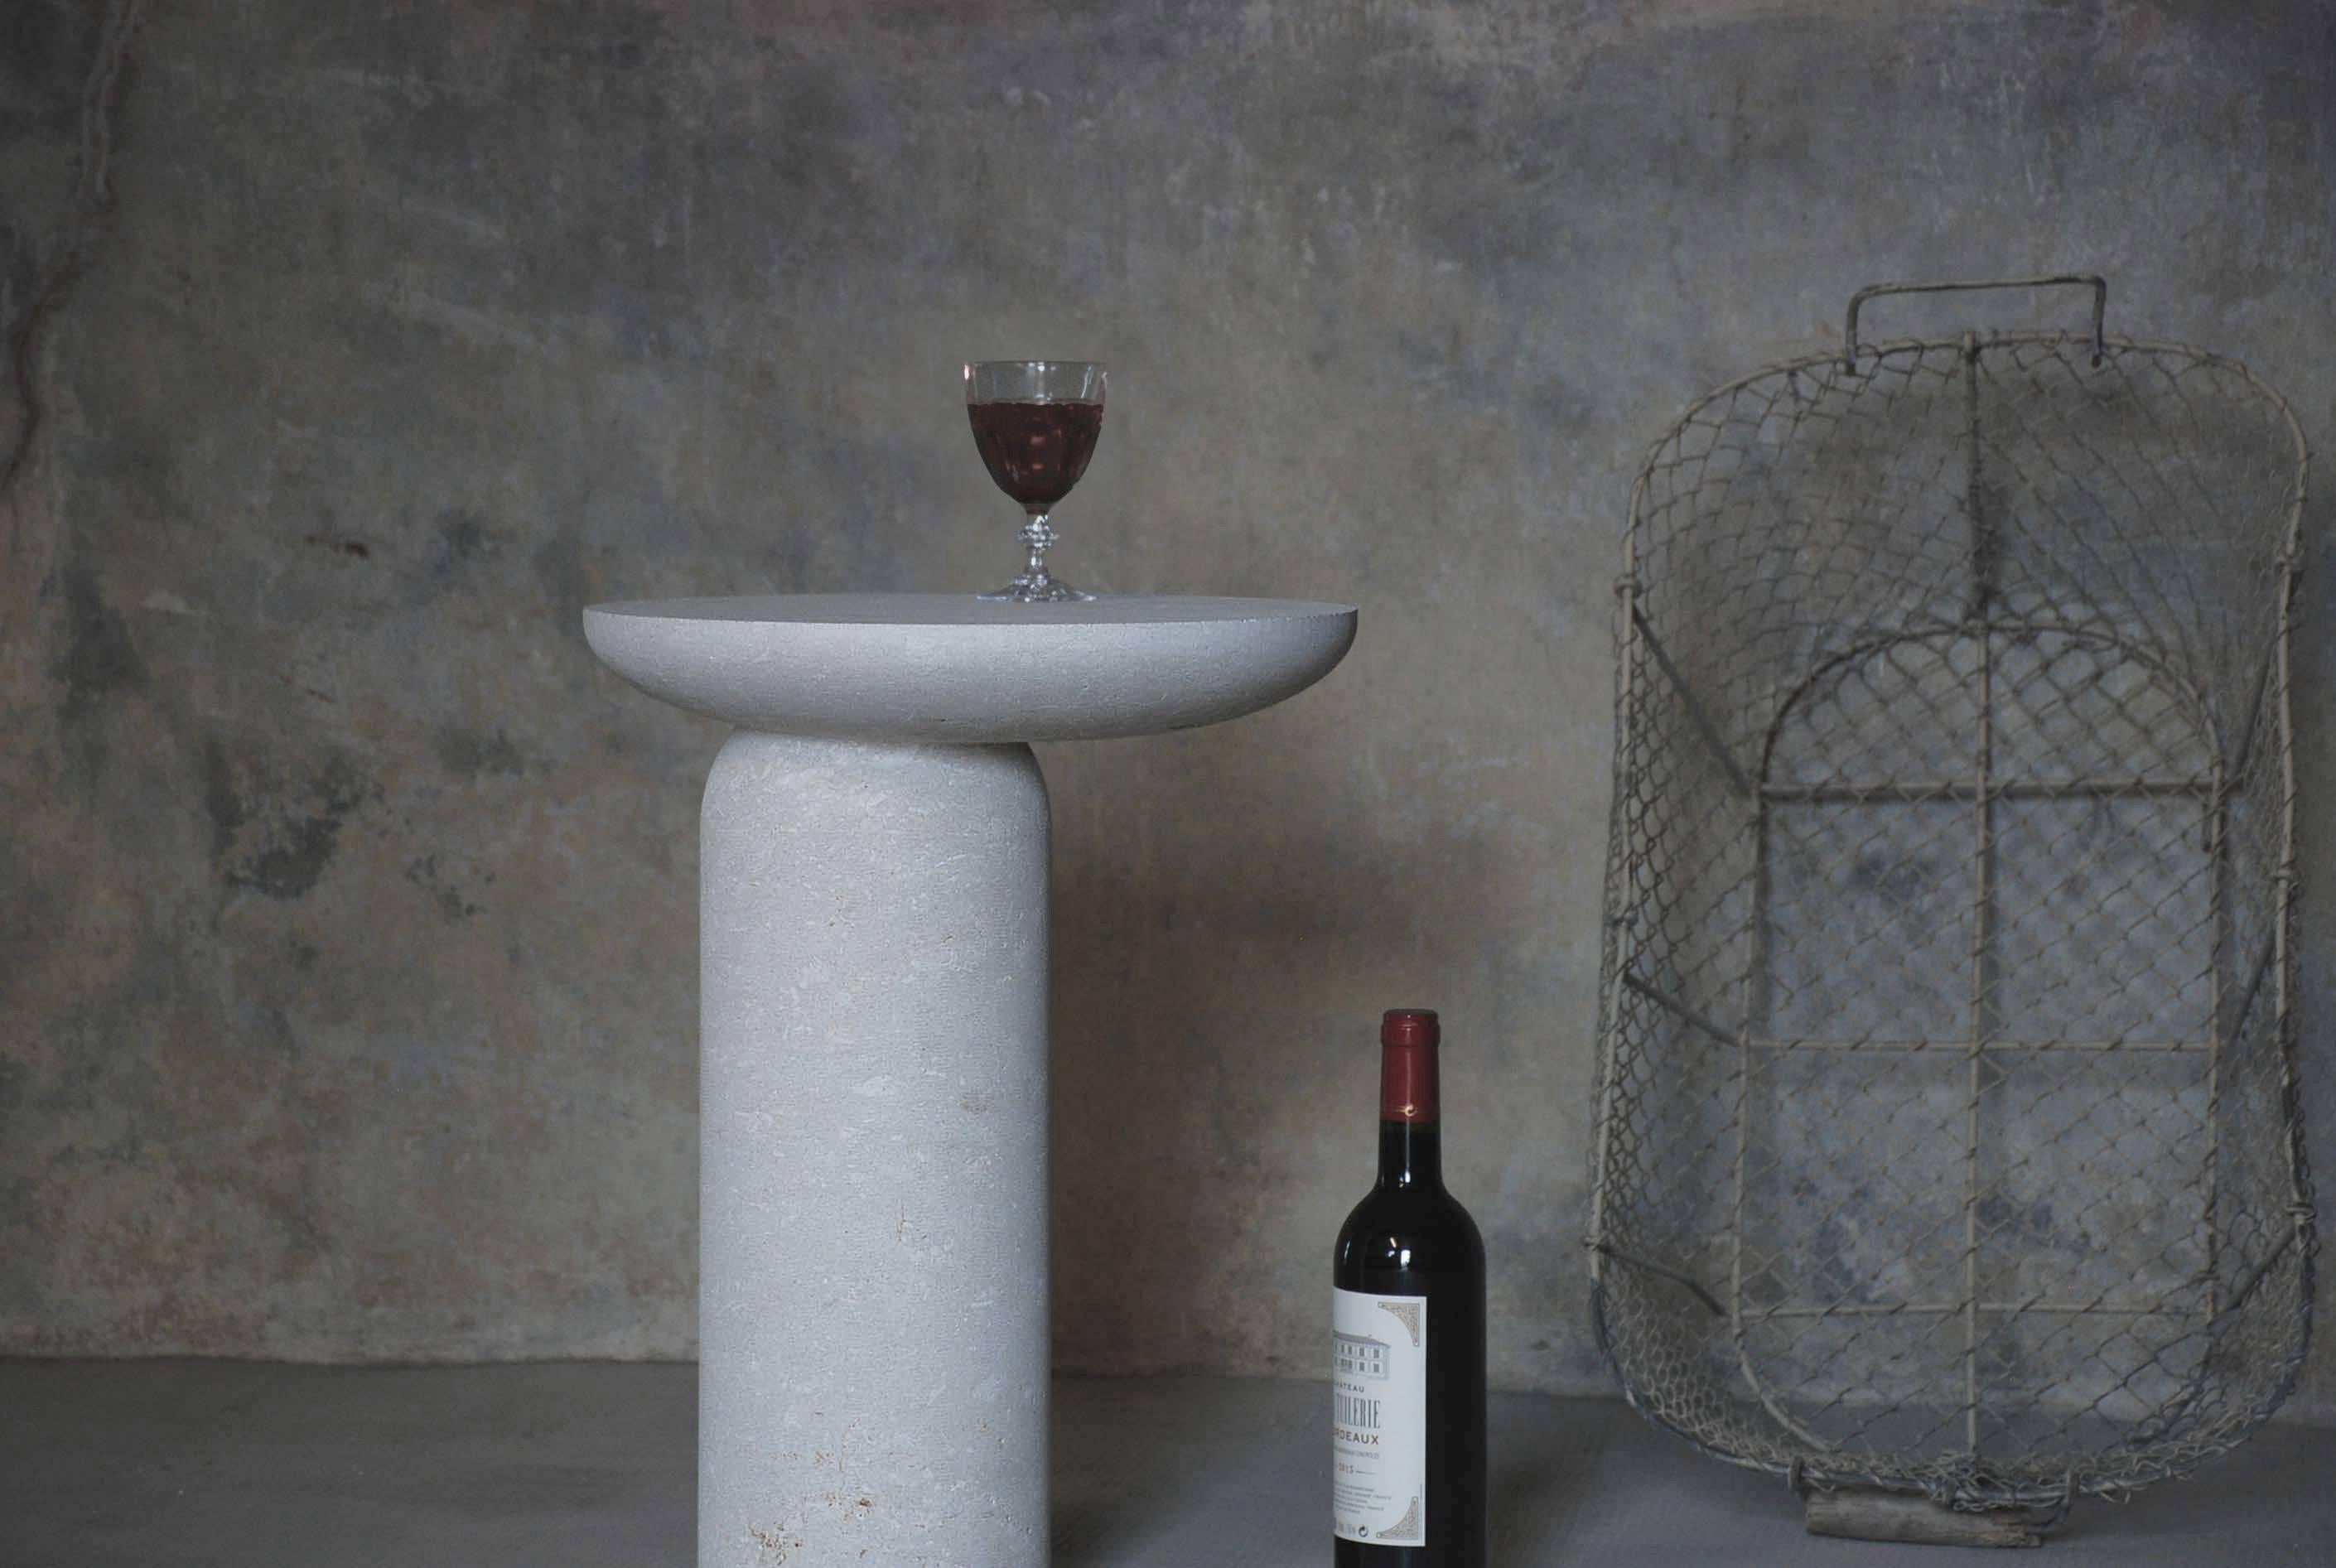 Décomplexé
side table.
Materials: Magny ornamental stone.
Dimensions: 50 x 38 cm. 

“While wandering in the streets I have been observing buildings
construction toward the sky and found myself eagerly interested
in slate material and